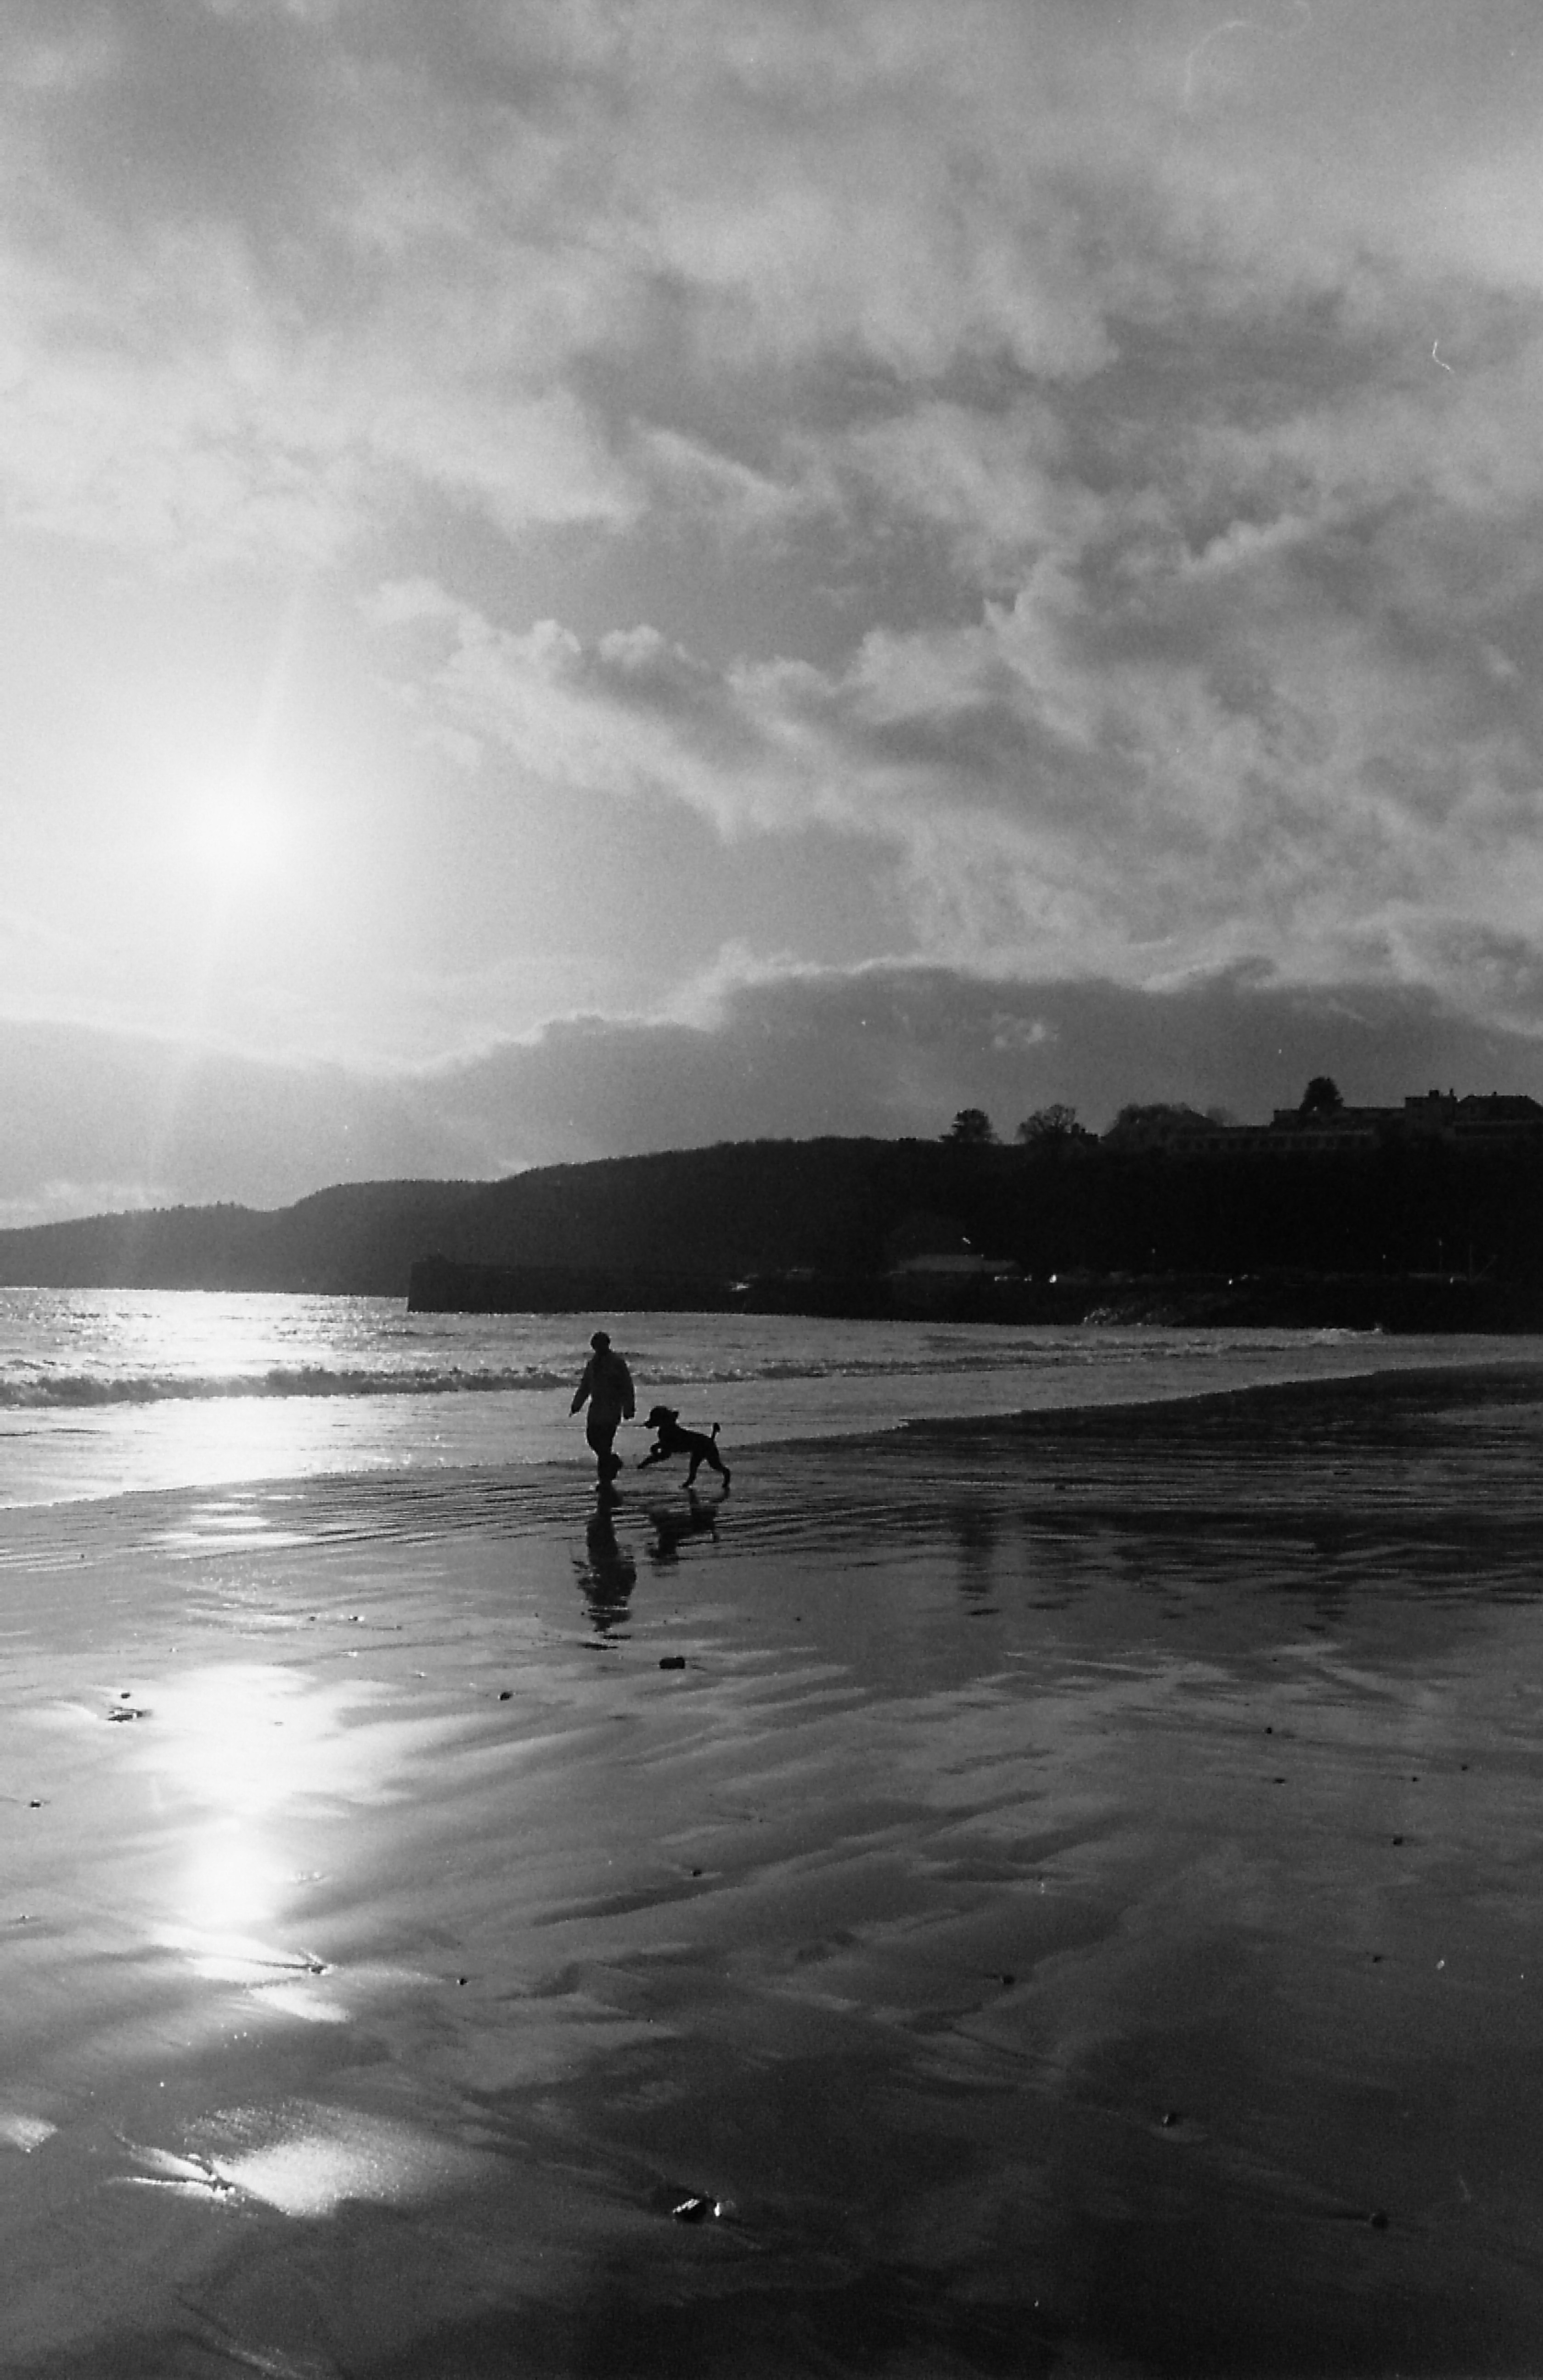 E0000913_Dog on the beach -mod.jpg   /guest/guest/Images/Saundersfoot/E0000913_Dog on the beach -mod.jpg